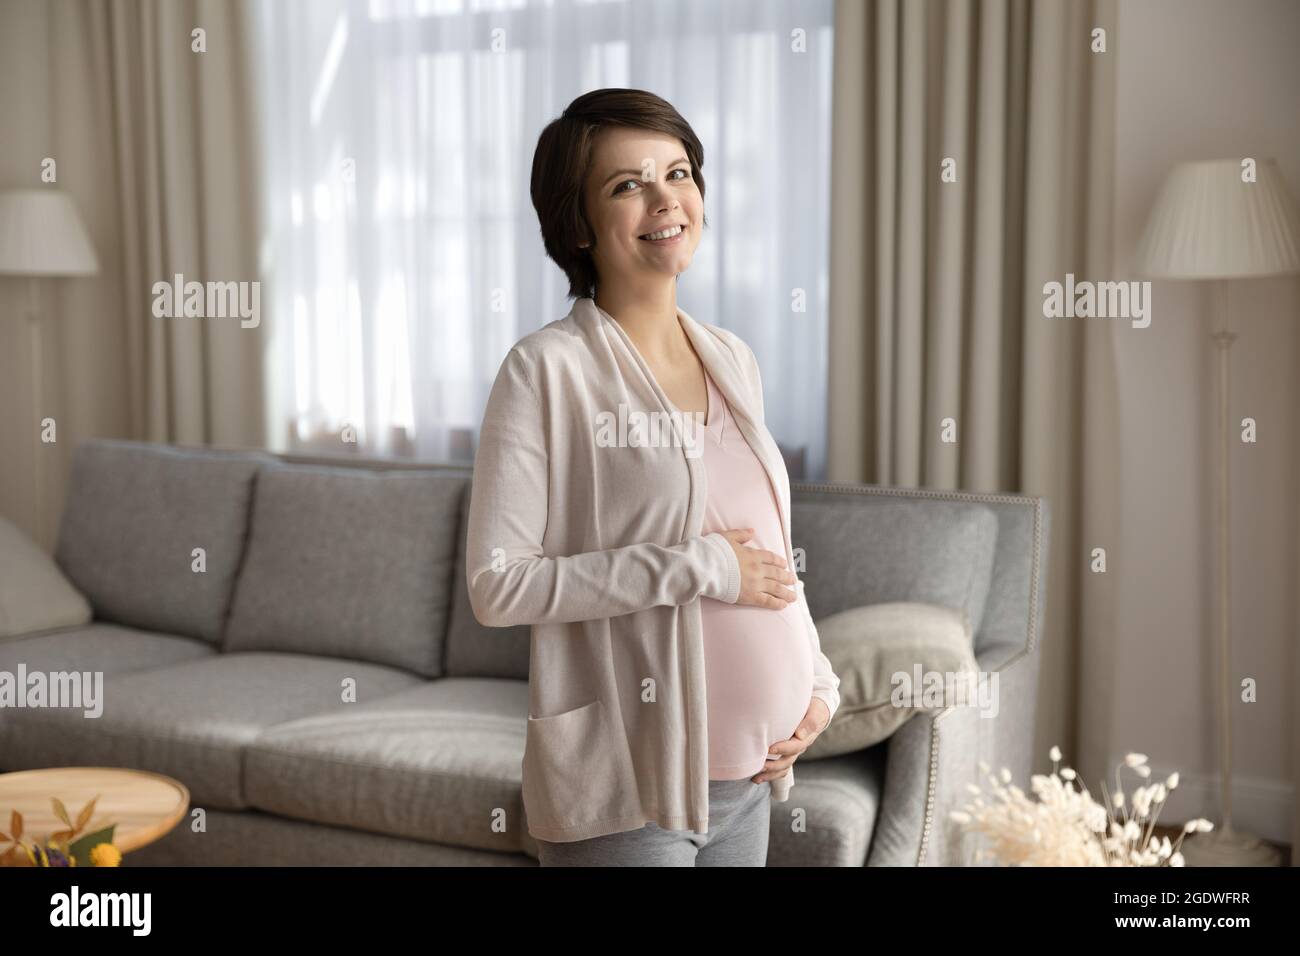 Portrait of happy young pregnant woman holding big tummy Stock Photo